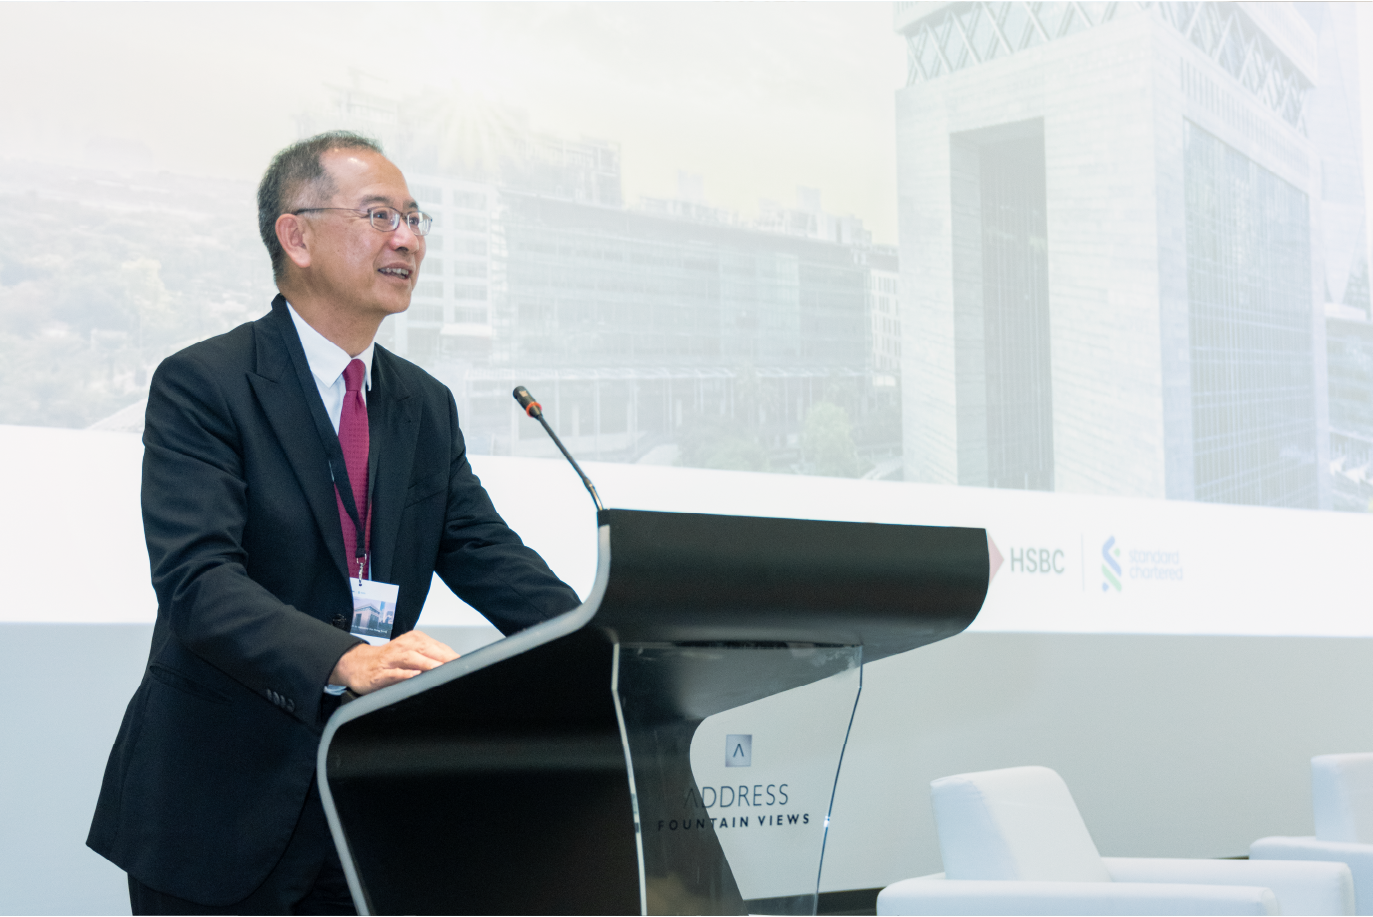 The Chief Executive of the Hong Kong Monetary Authority, Mr Eddie Yue, delivers opening remarks on May 31 (Dubai time) at a luncheon in Dubai, the United Arab Emirates, which is attended by senior representatives from major local financial institutions and corporates.